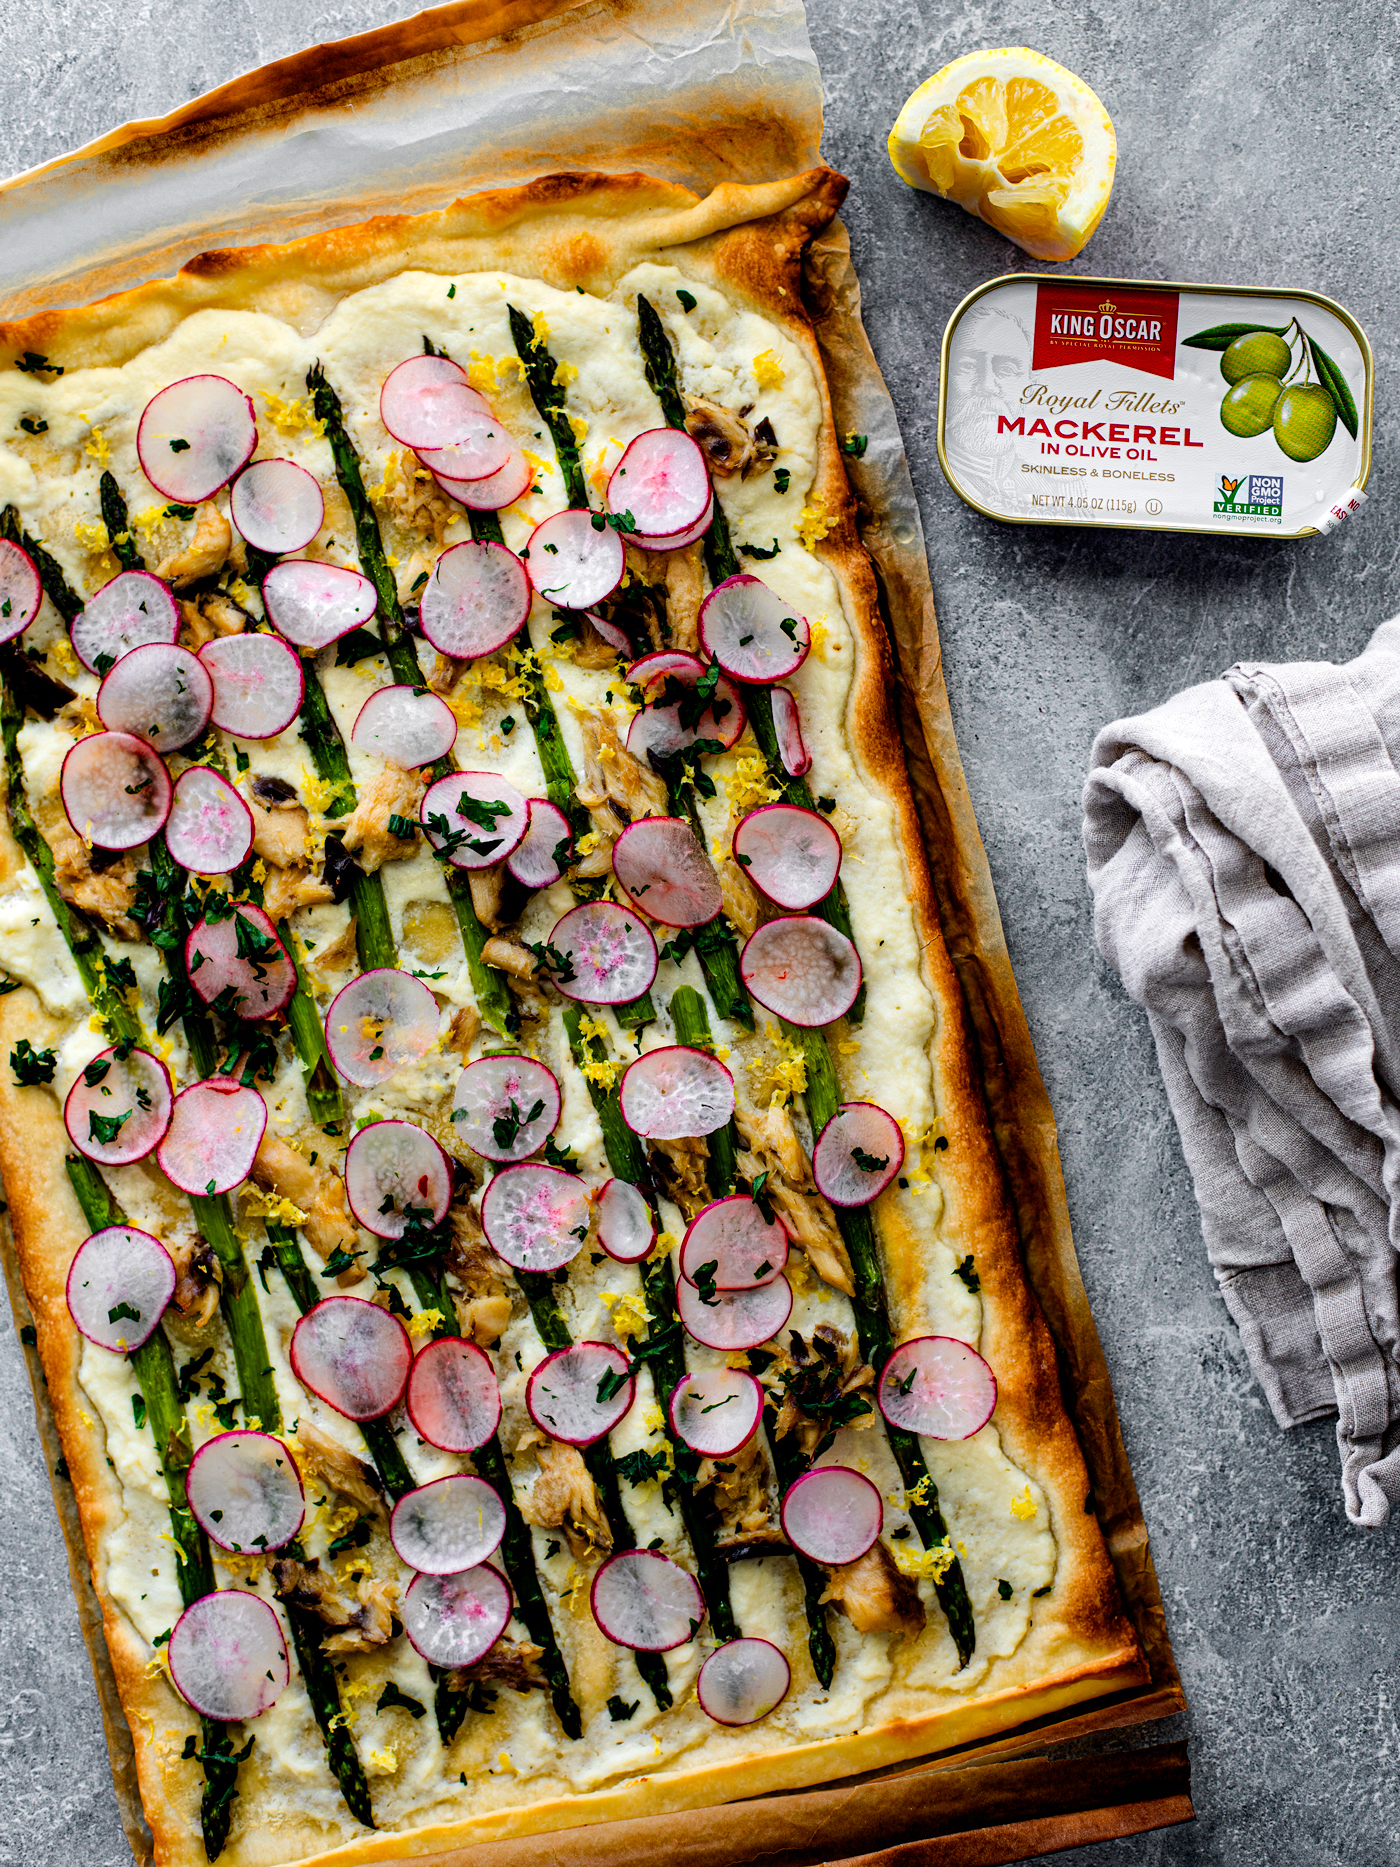 Asparagus and mackerel flatbread on parchment with can of King Oscar mackerel next to it.